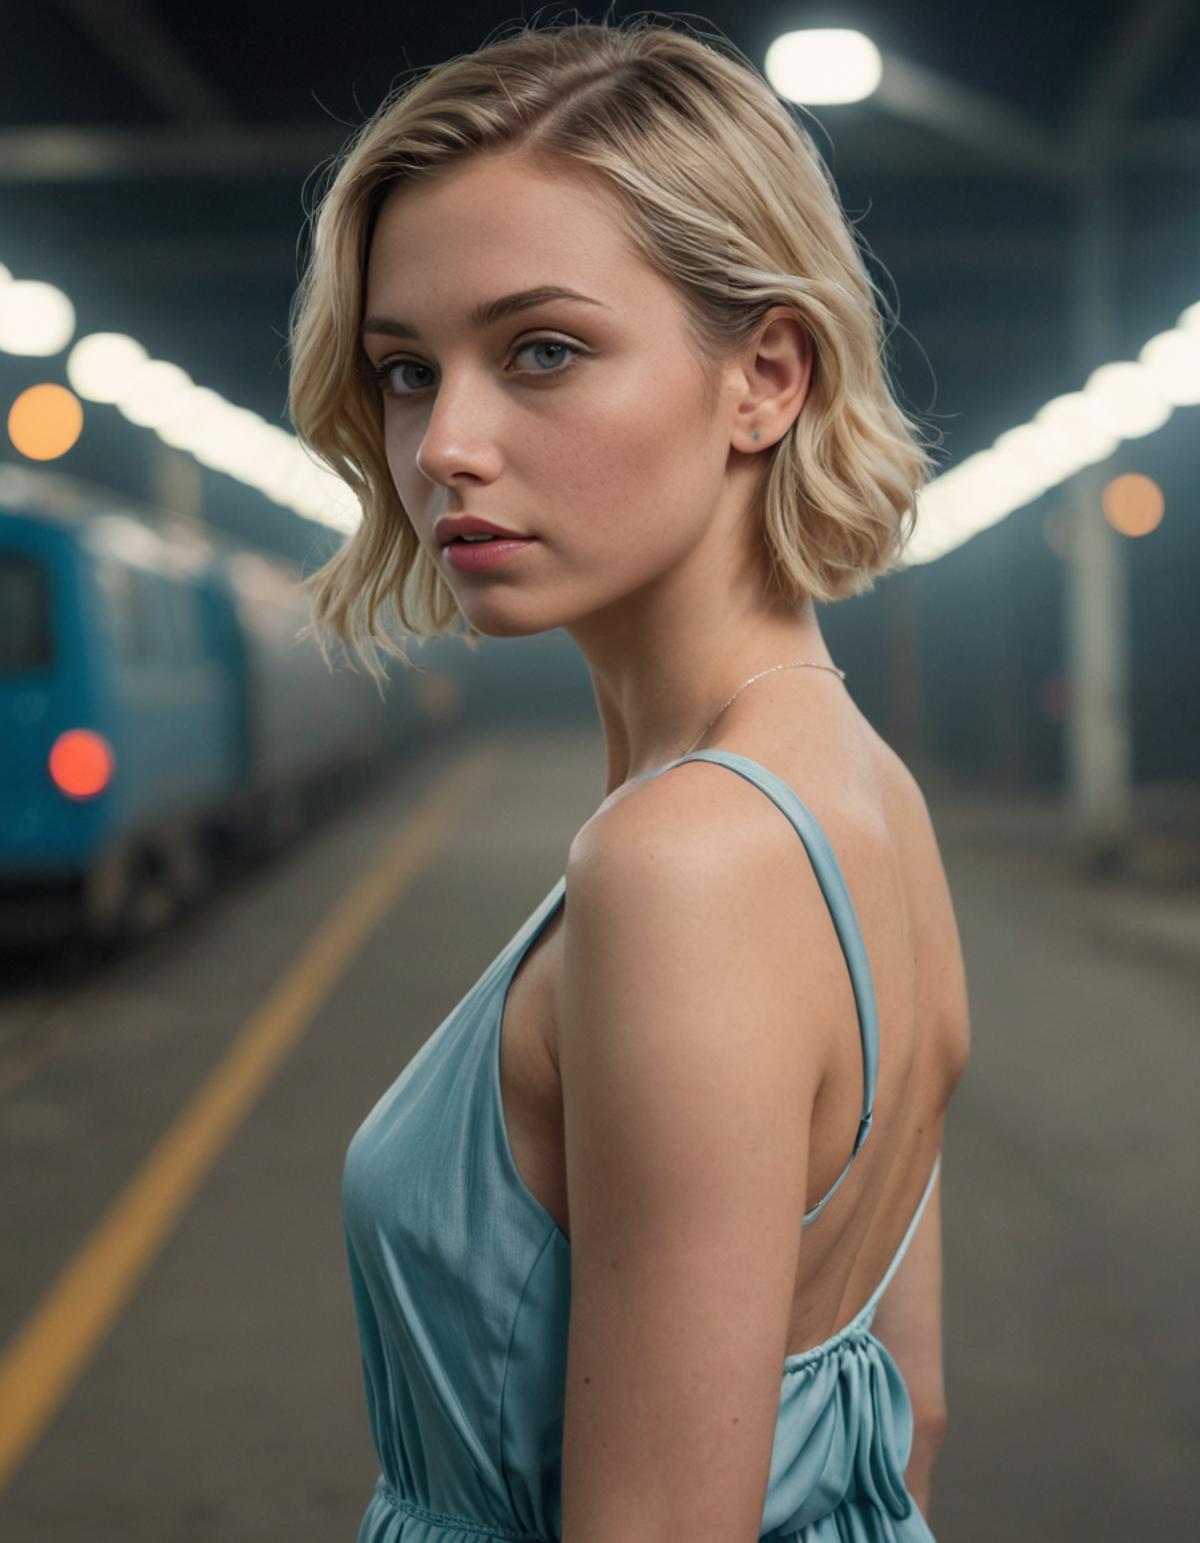 Blonde Woman in a Blue Dress Standing in Front of a Train